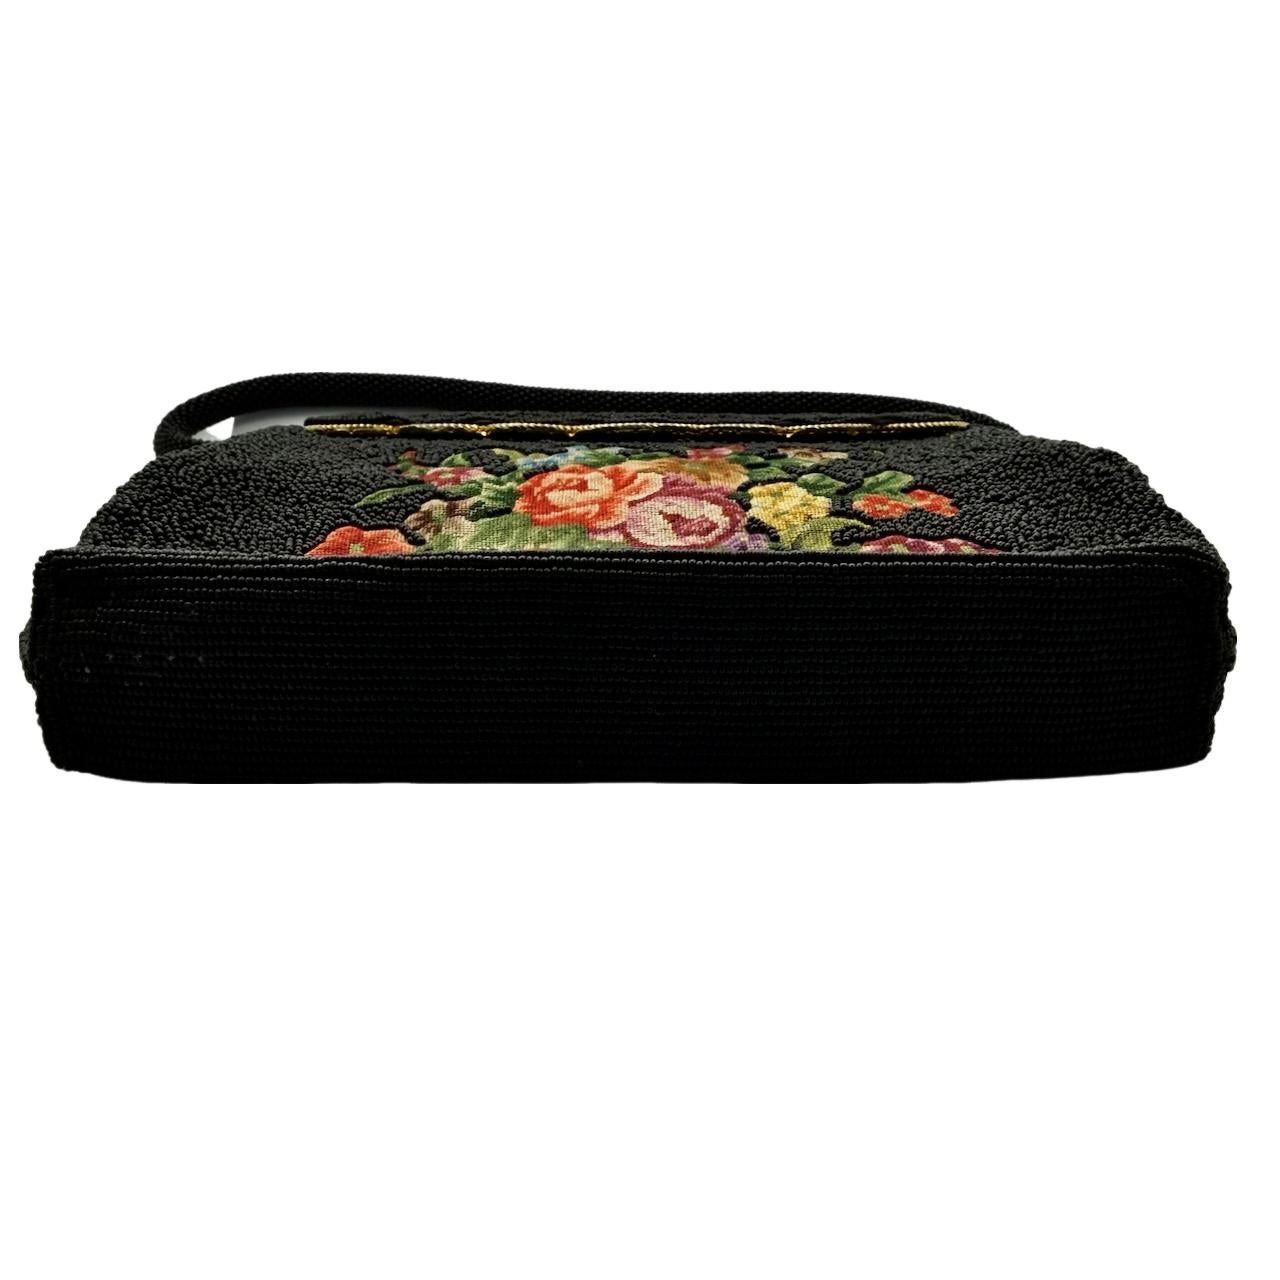 Black Beaded and Floral Tapestry Embroidered Handbag circa 1950s For Sale 4